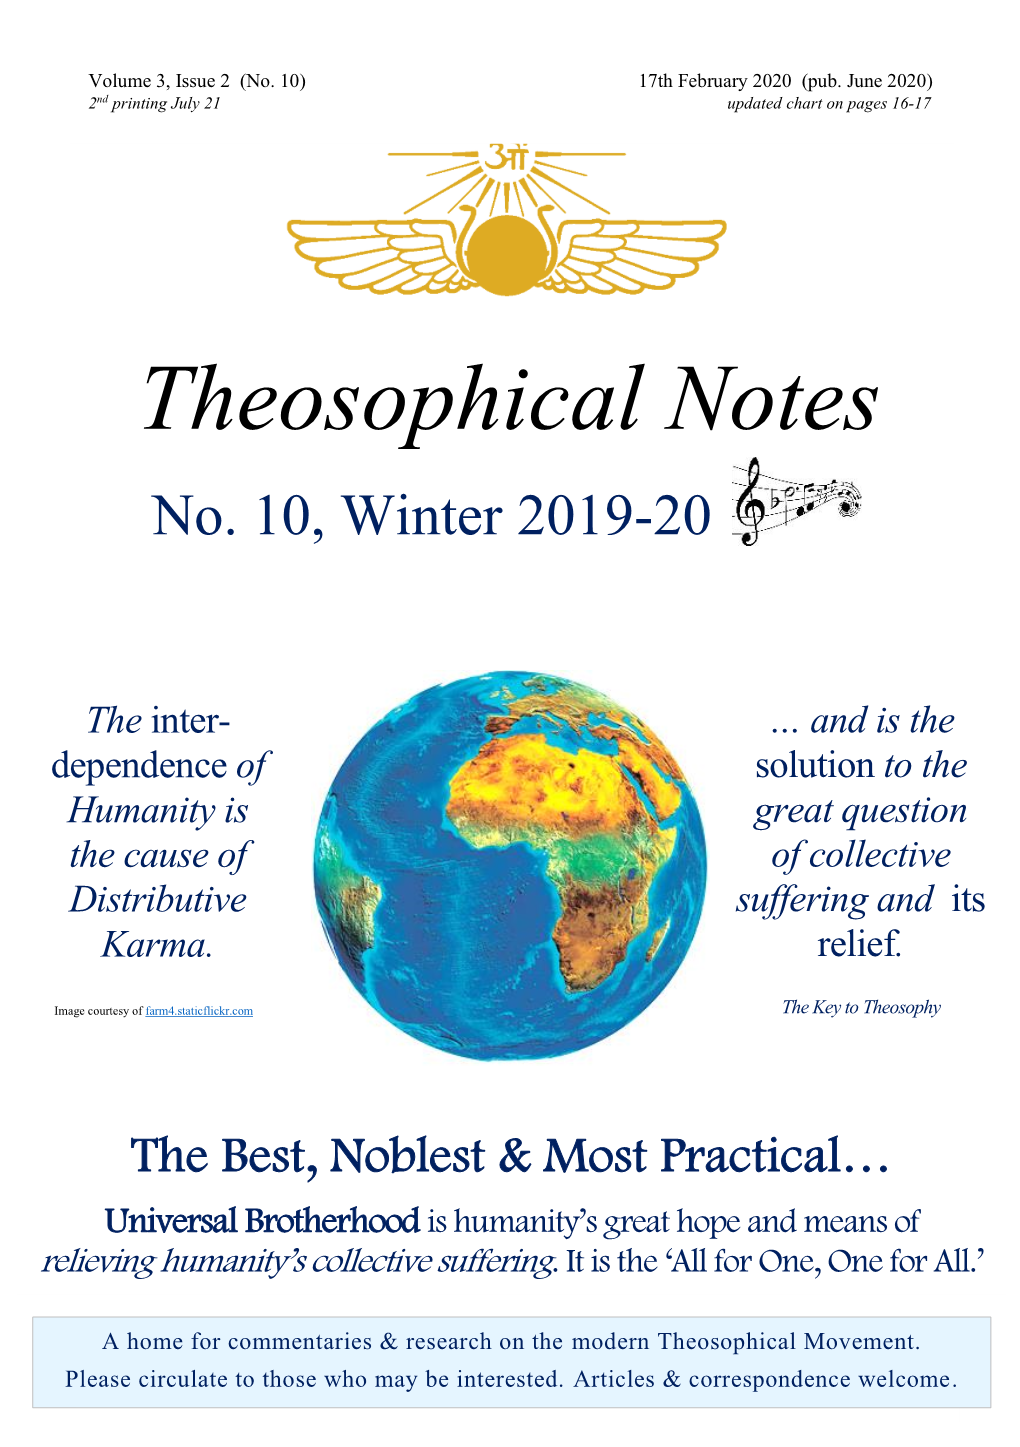 Theosophical Notes No. 10 Winter 2019-20